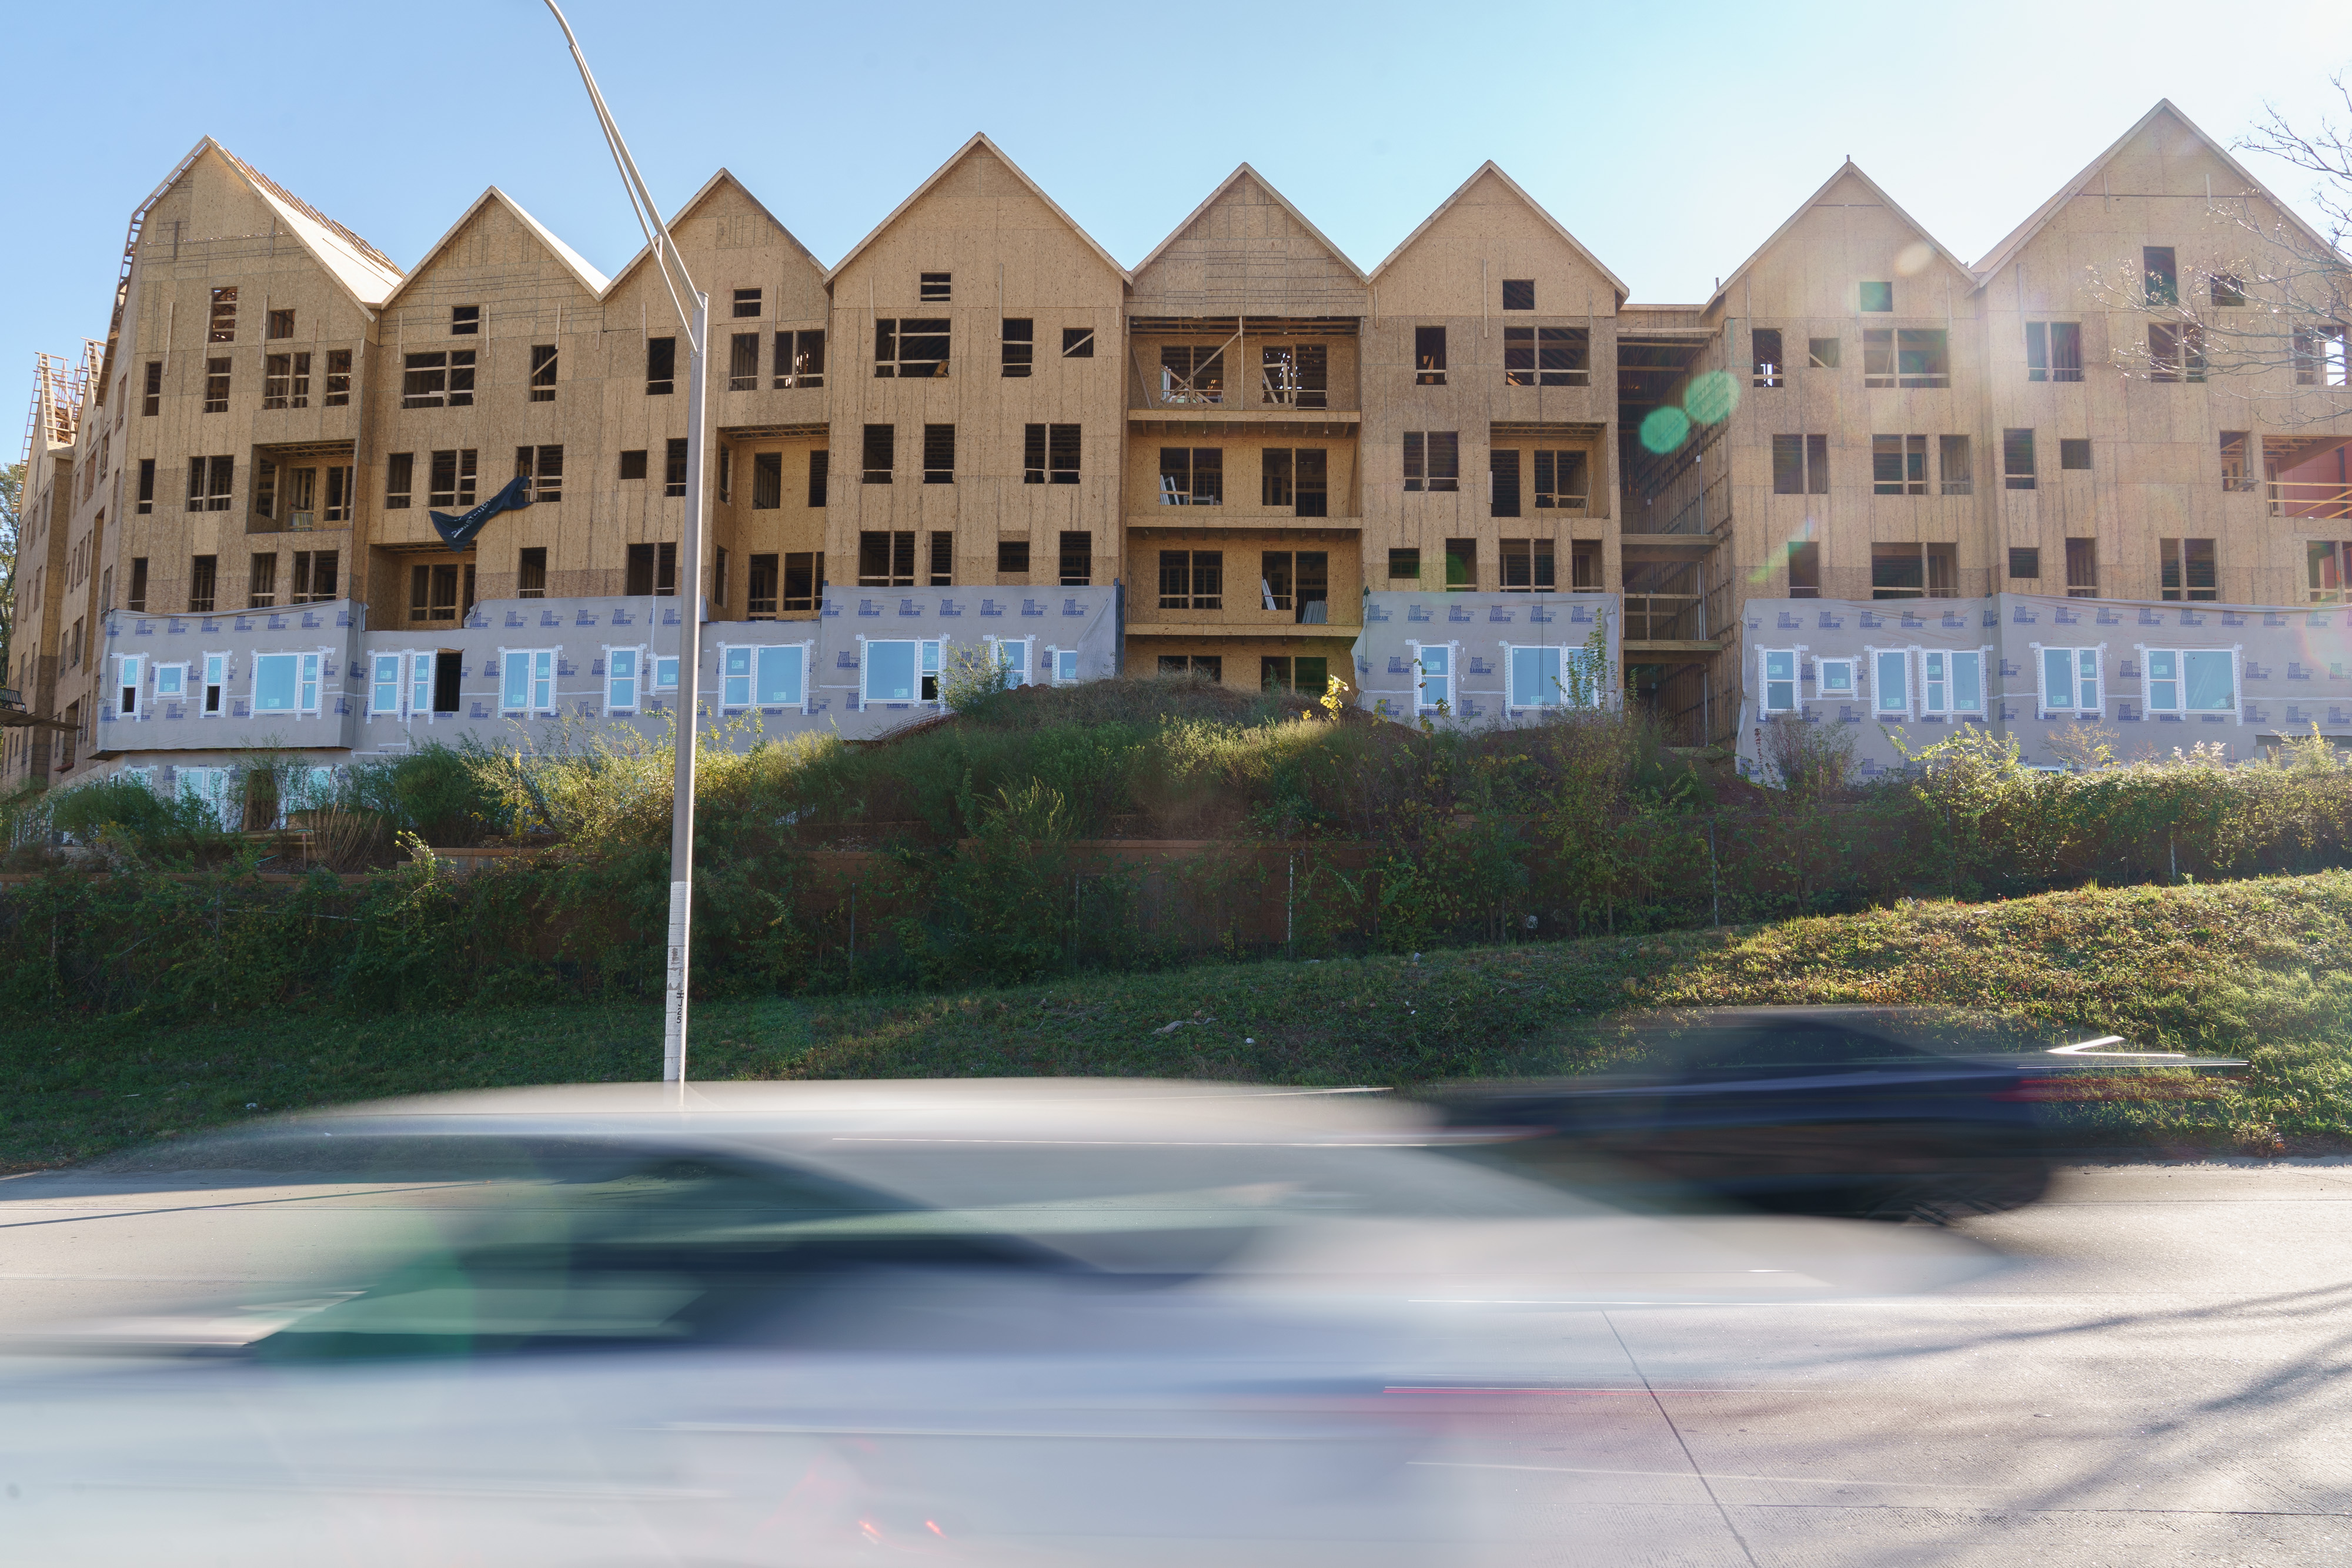 Row of multifamily houses under construction